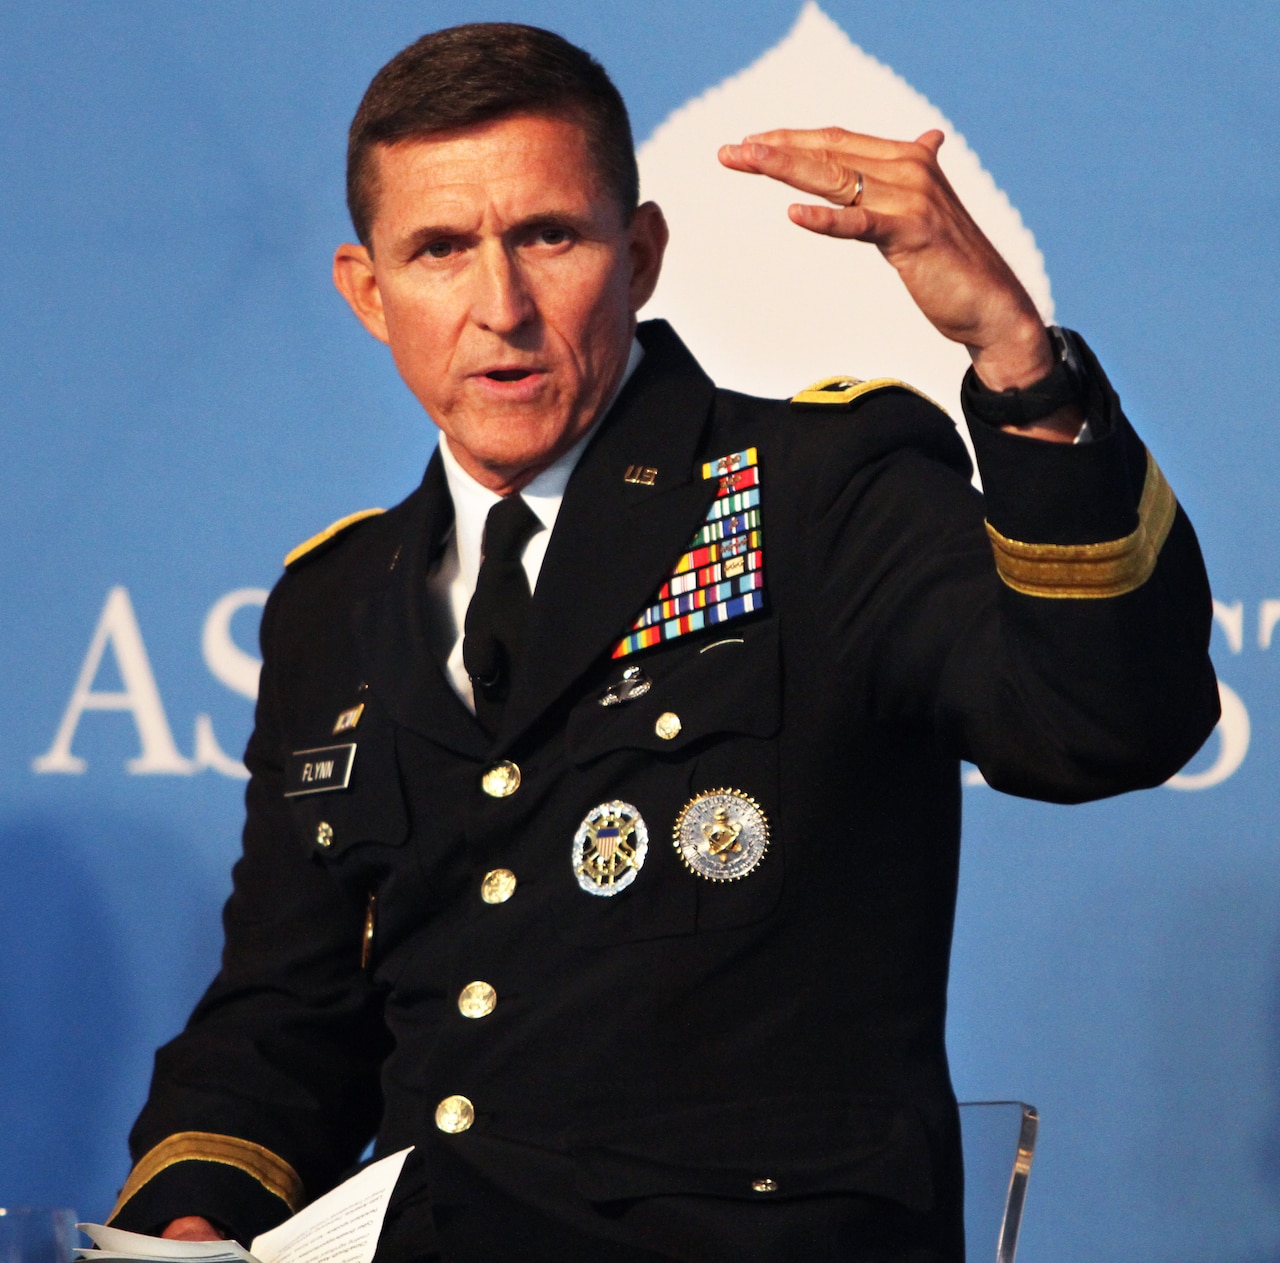 Transparency has to be a watchword for the intelligence community if it is to regain the public’s trust, Army Lt. Gen. Michael T. Flynn, director of the Defense Intelligence Agency, said at the Aspen Security Forum in Colorado, July 26, 2014. DoD photo by Claudette Roulo